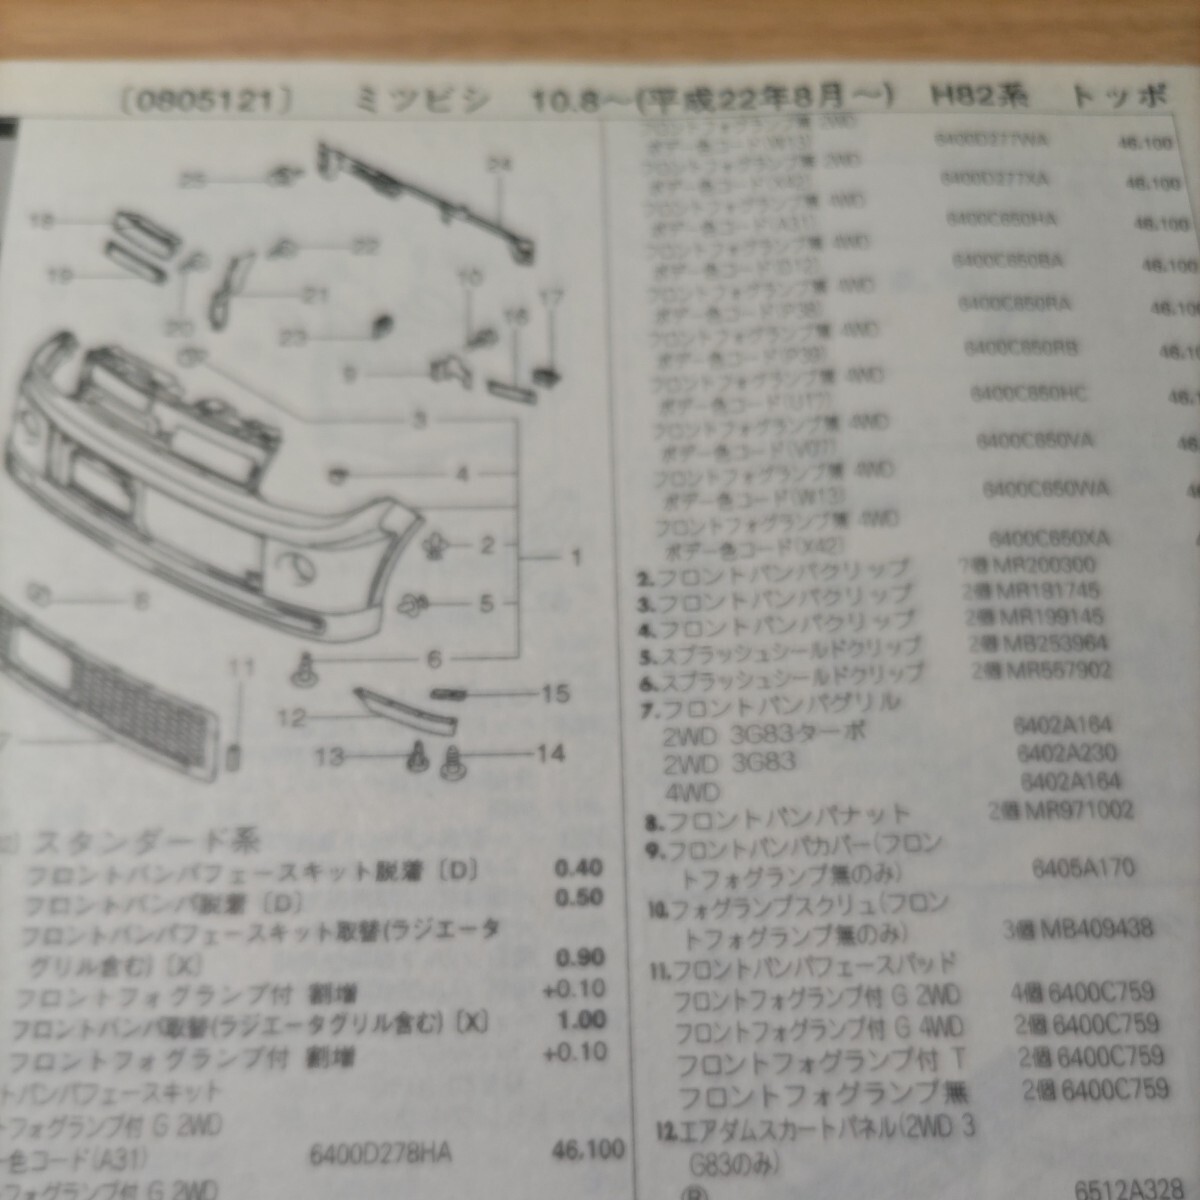 **[ parts guide ] Mitsubishi ( MMC ) Toppo (H82 series ) H22.8~ 2010 year latter term version [ out of print * rare ]